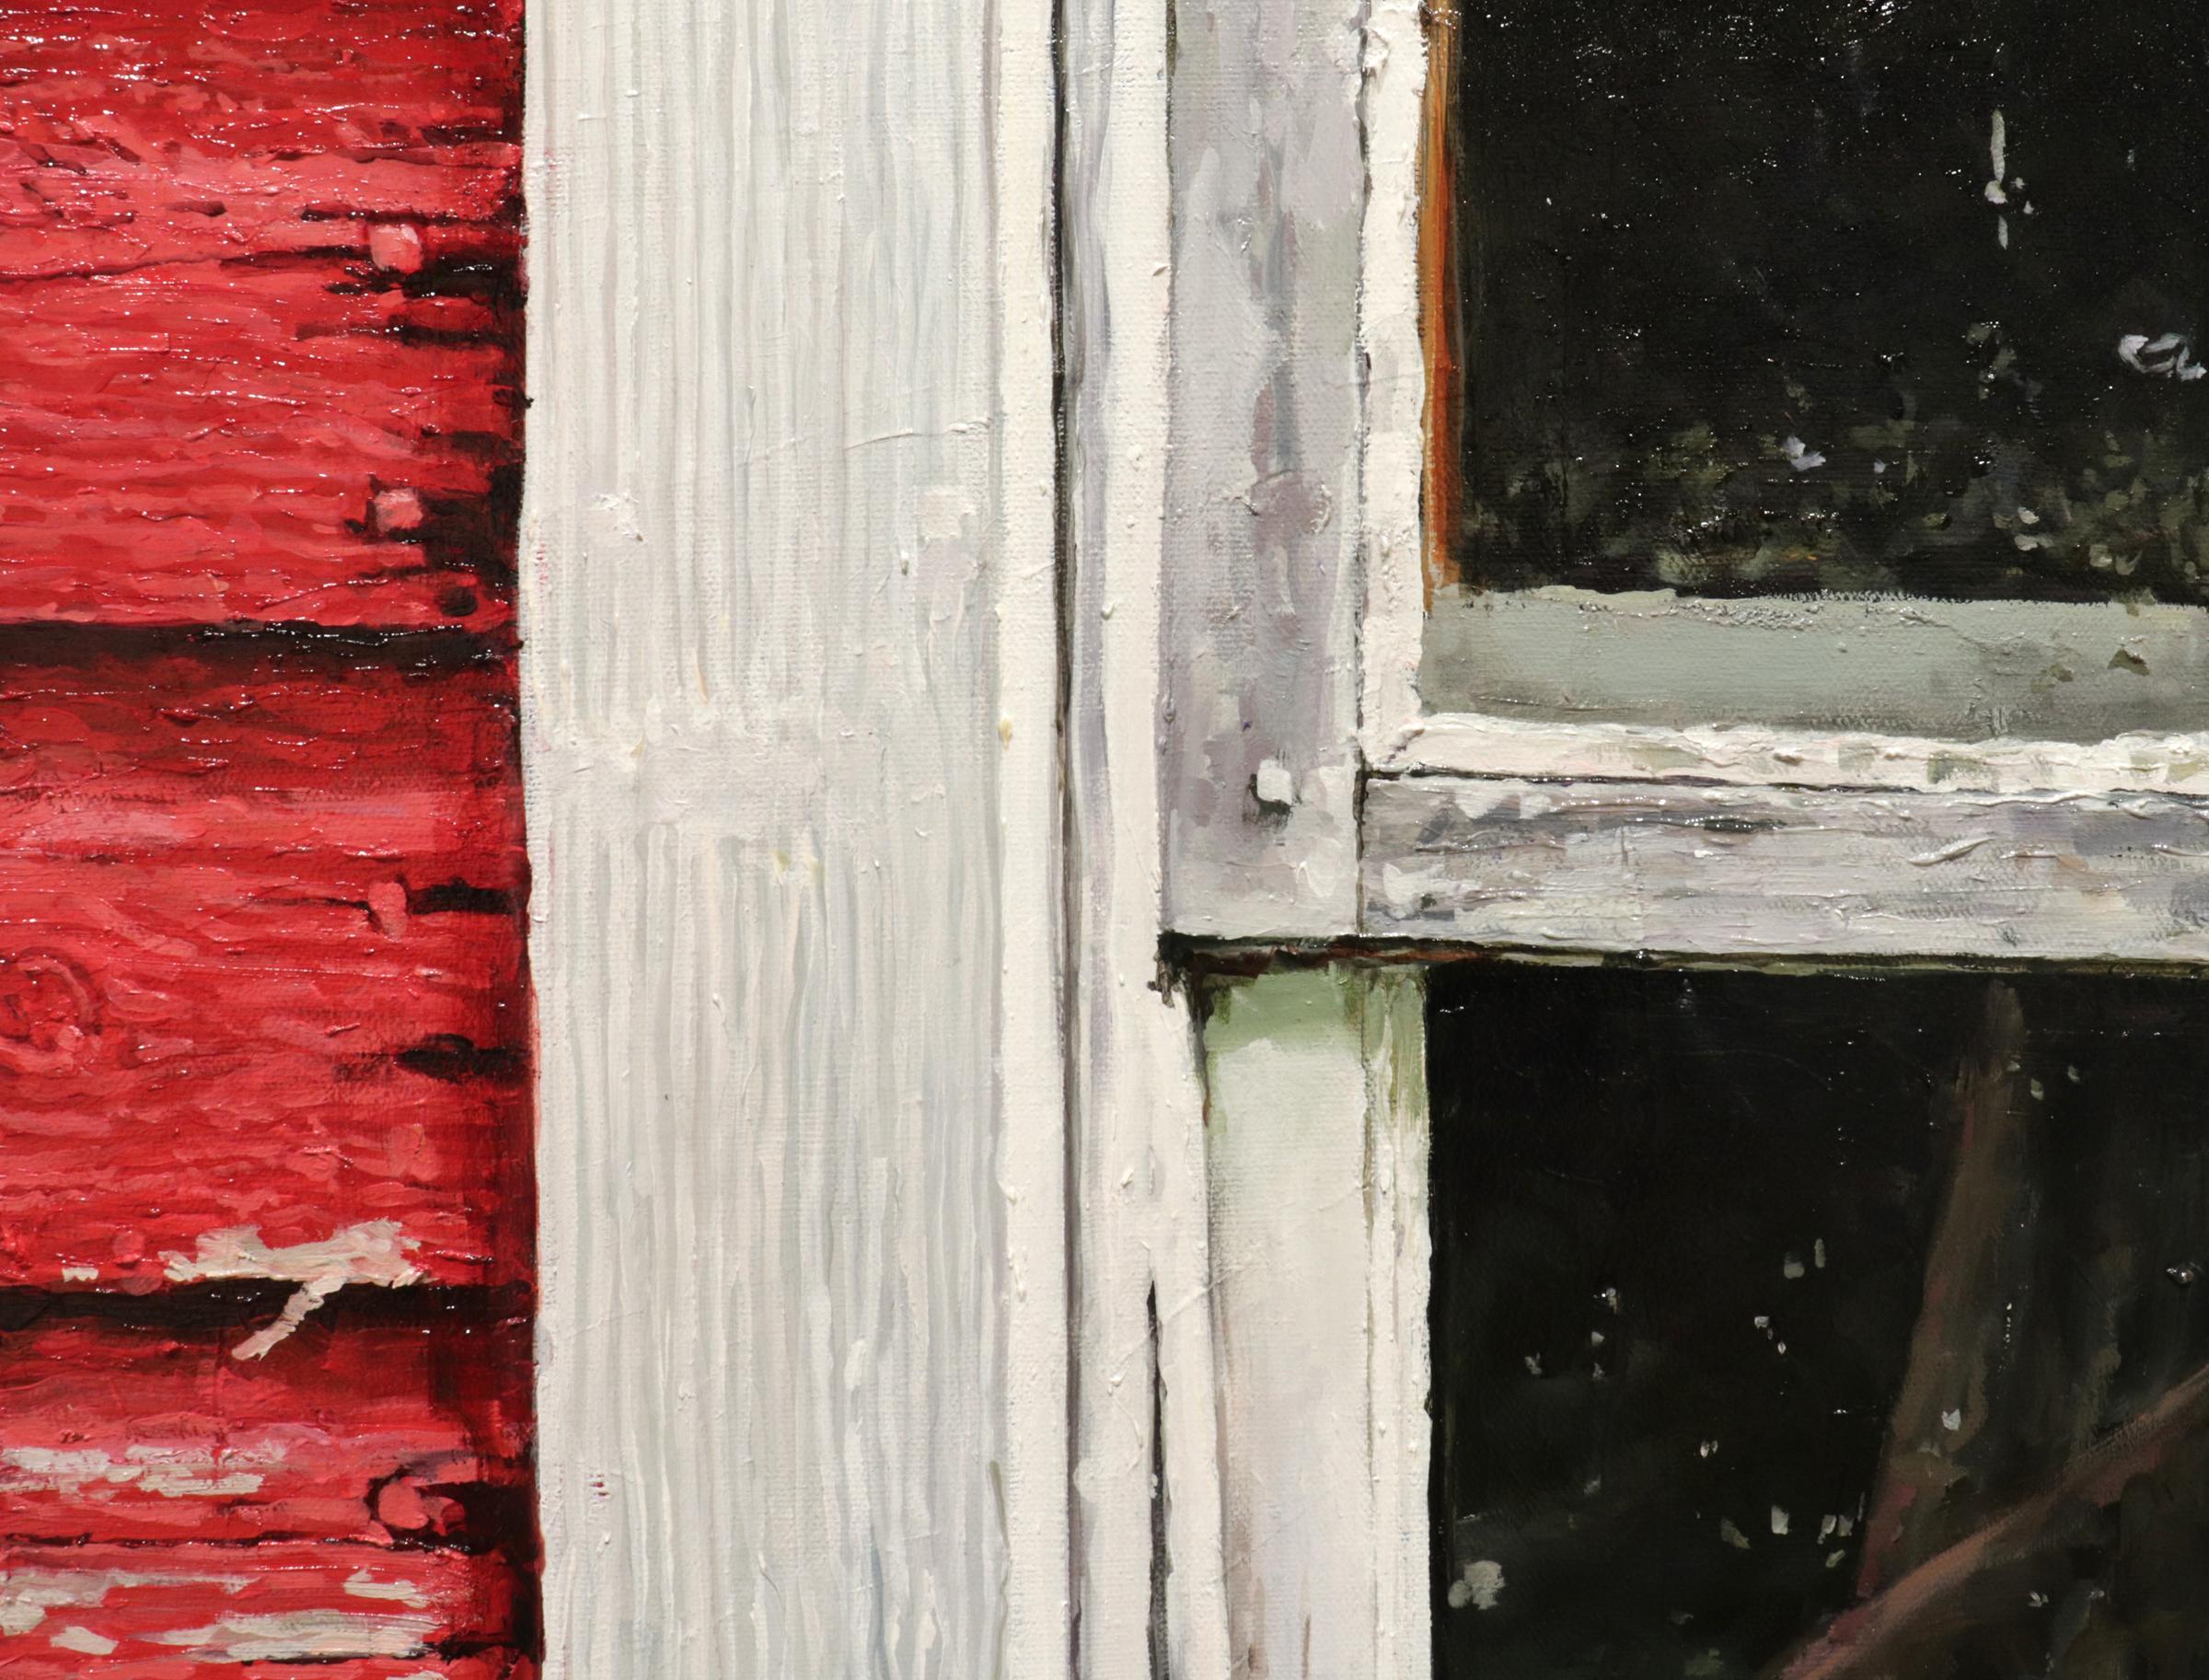 BARN WINDOW - Photorealism / Old Red Barn / Weathered Farmhouse / Reflection - Painting by Richard Combes